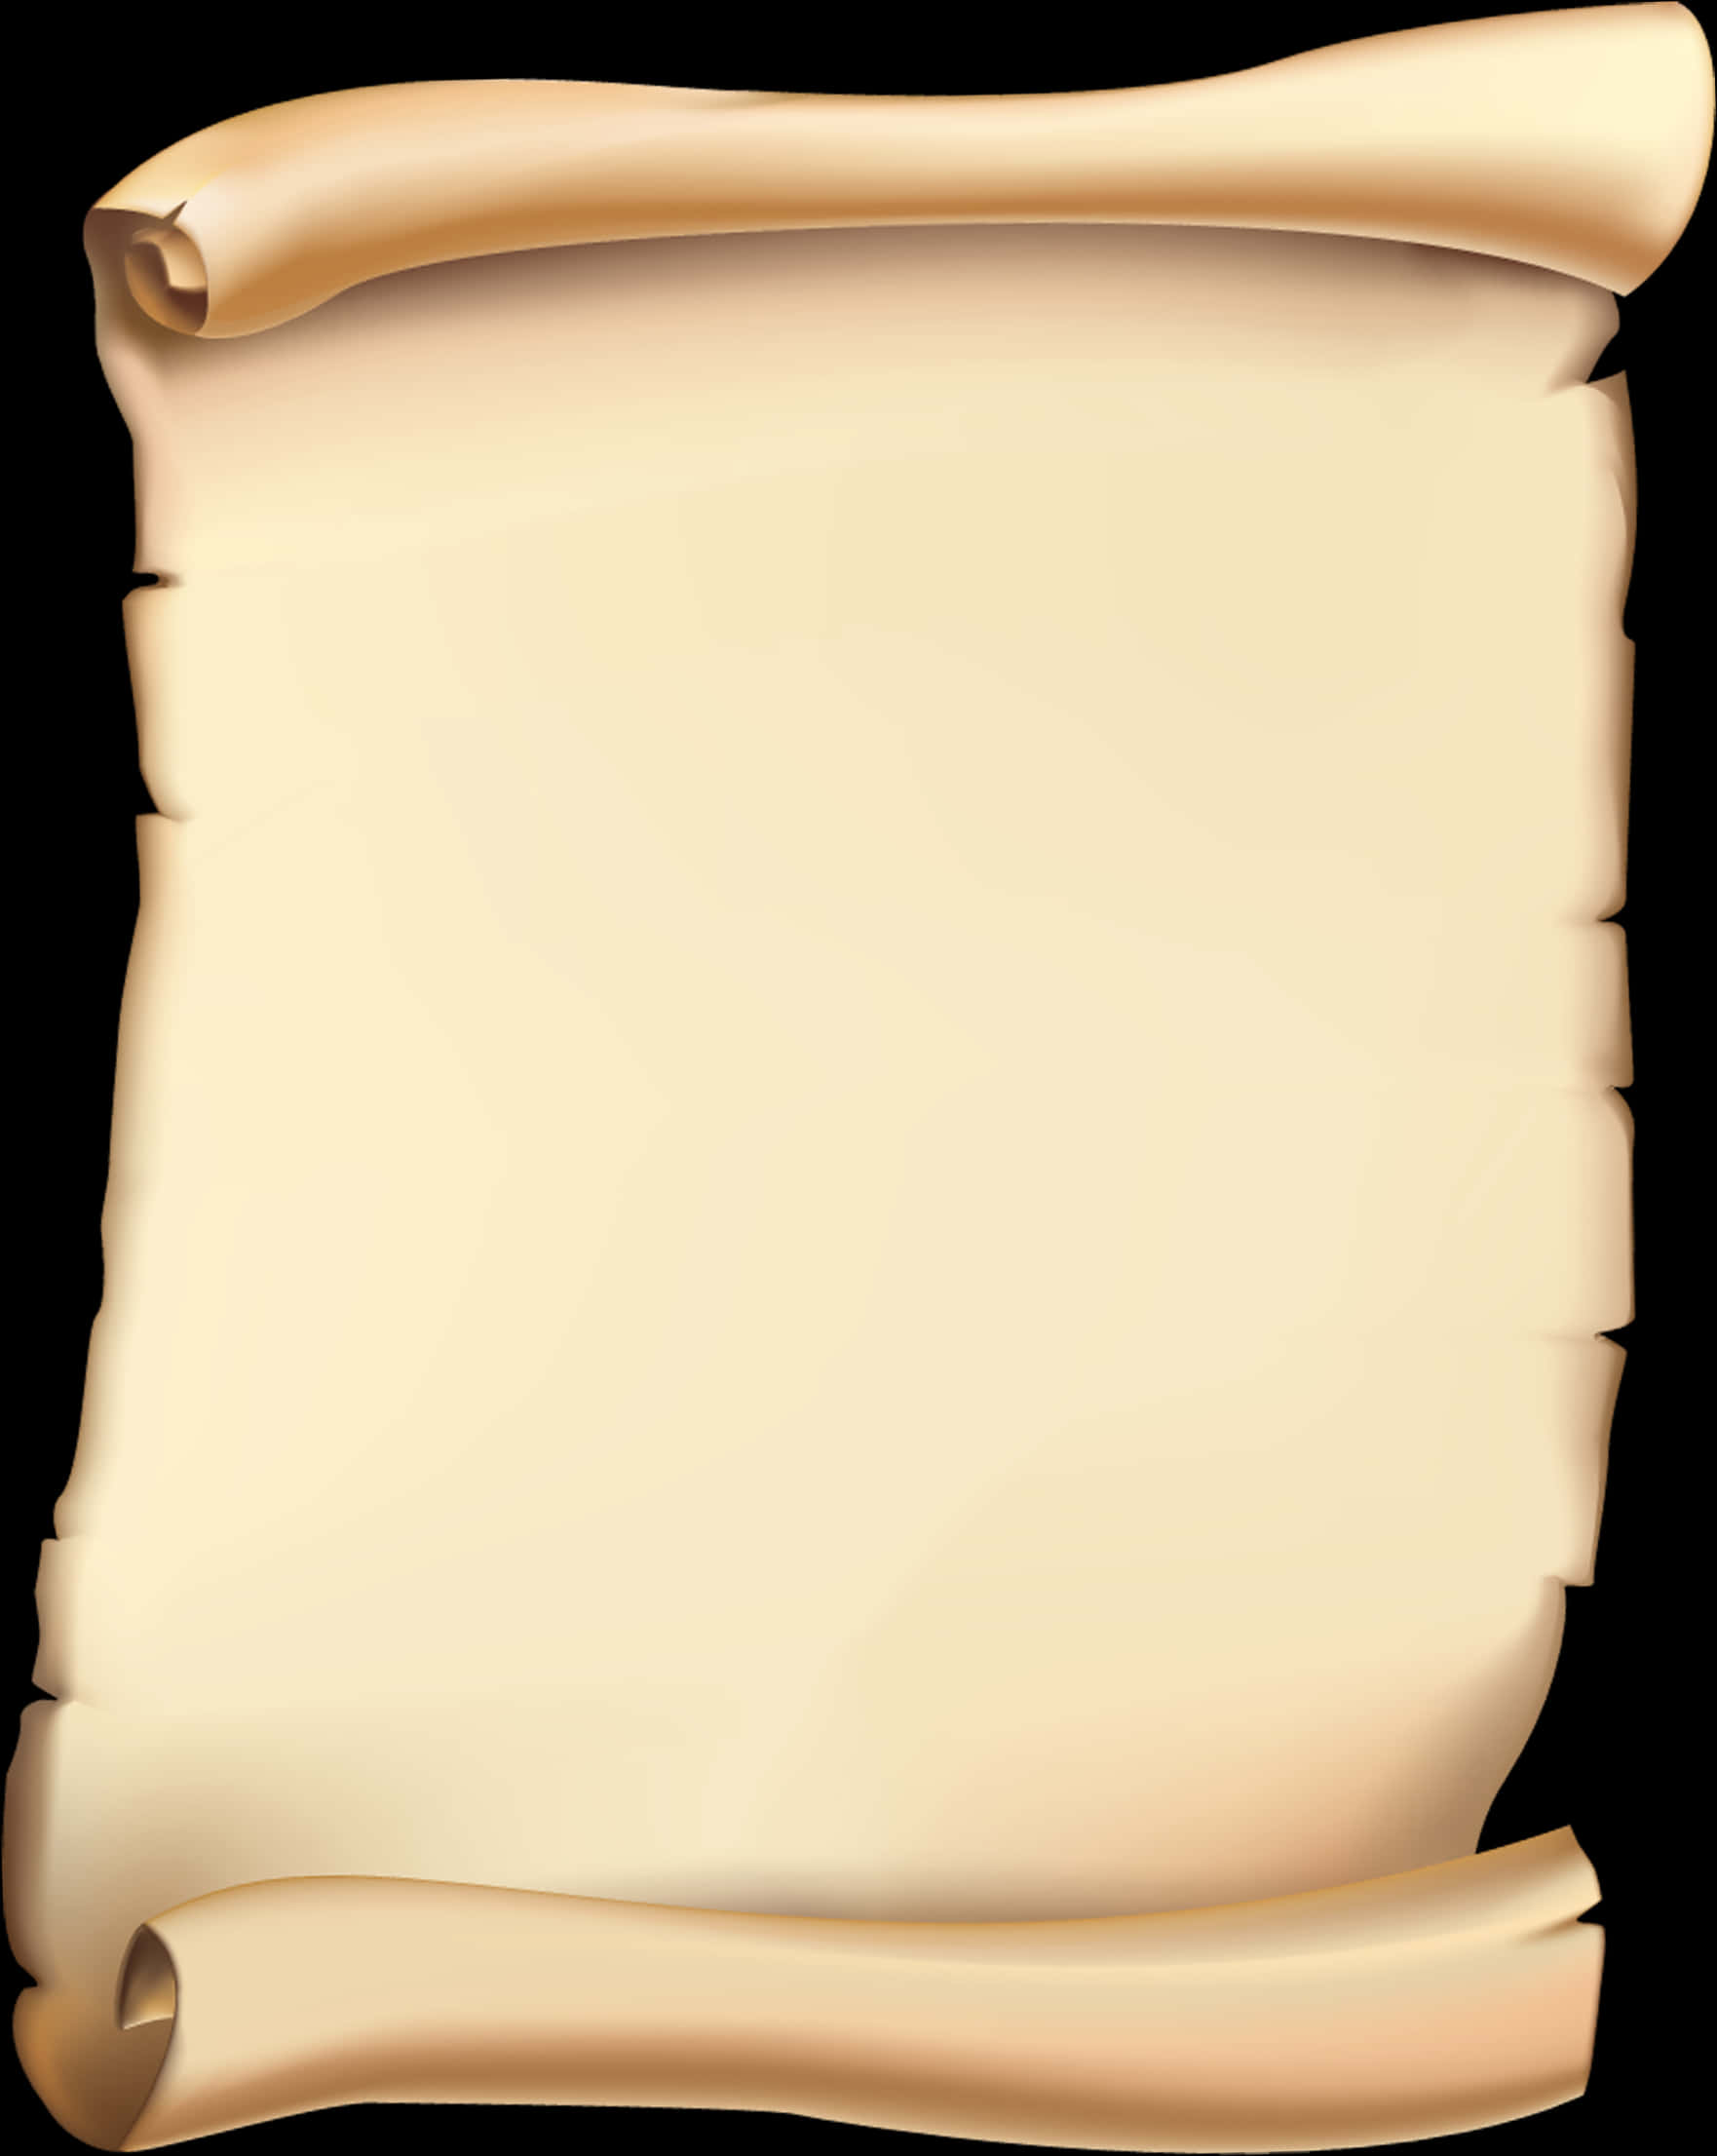 A Scroll Of Parchment With A Black Background